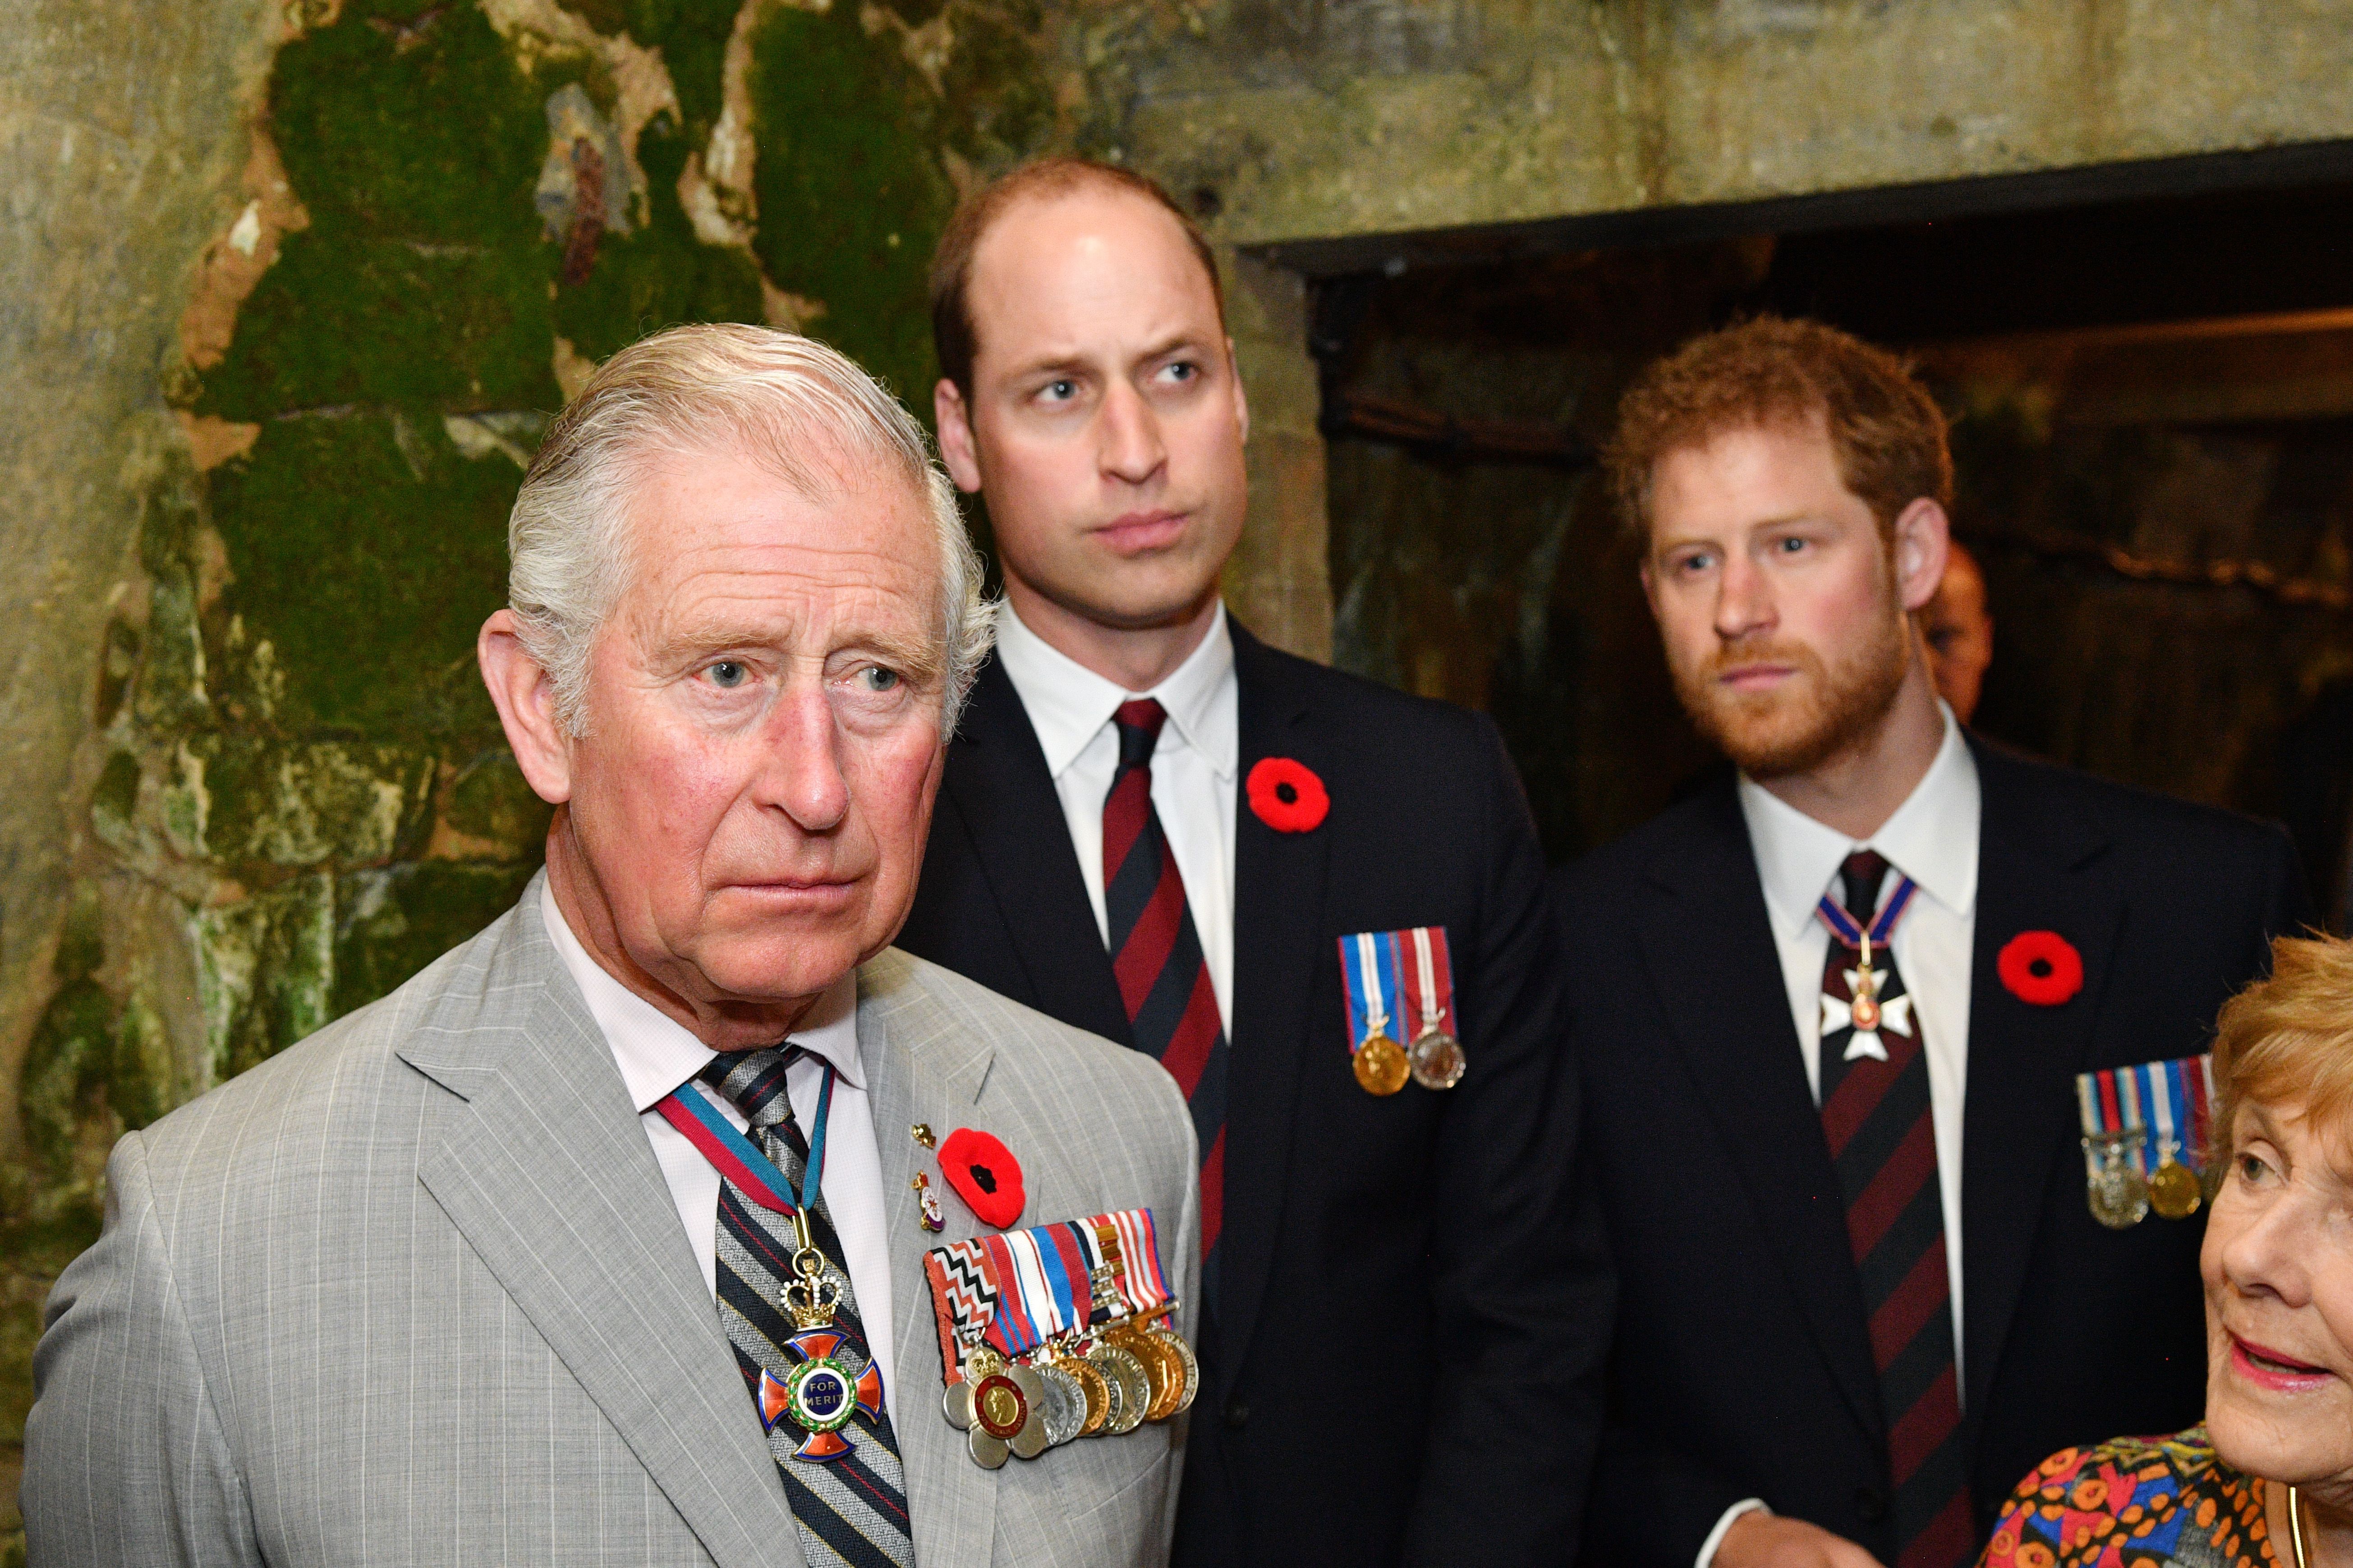 Prince Charles, Prince William, and Prince Harry at Vimy Memorial Park during the commemorations for the centenary of the Battle of Vimy Ridge on April 9, 2017, in Vimy, France. | Source: Tim Rooke - Pool/Getty Images